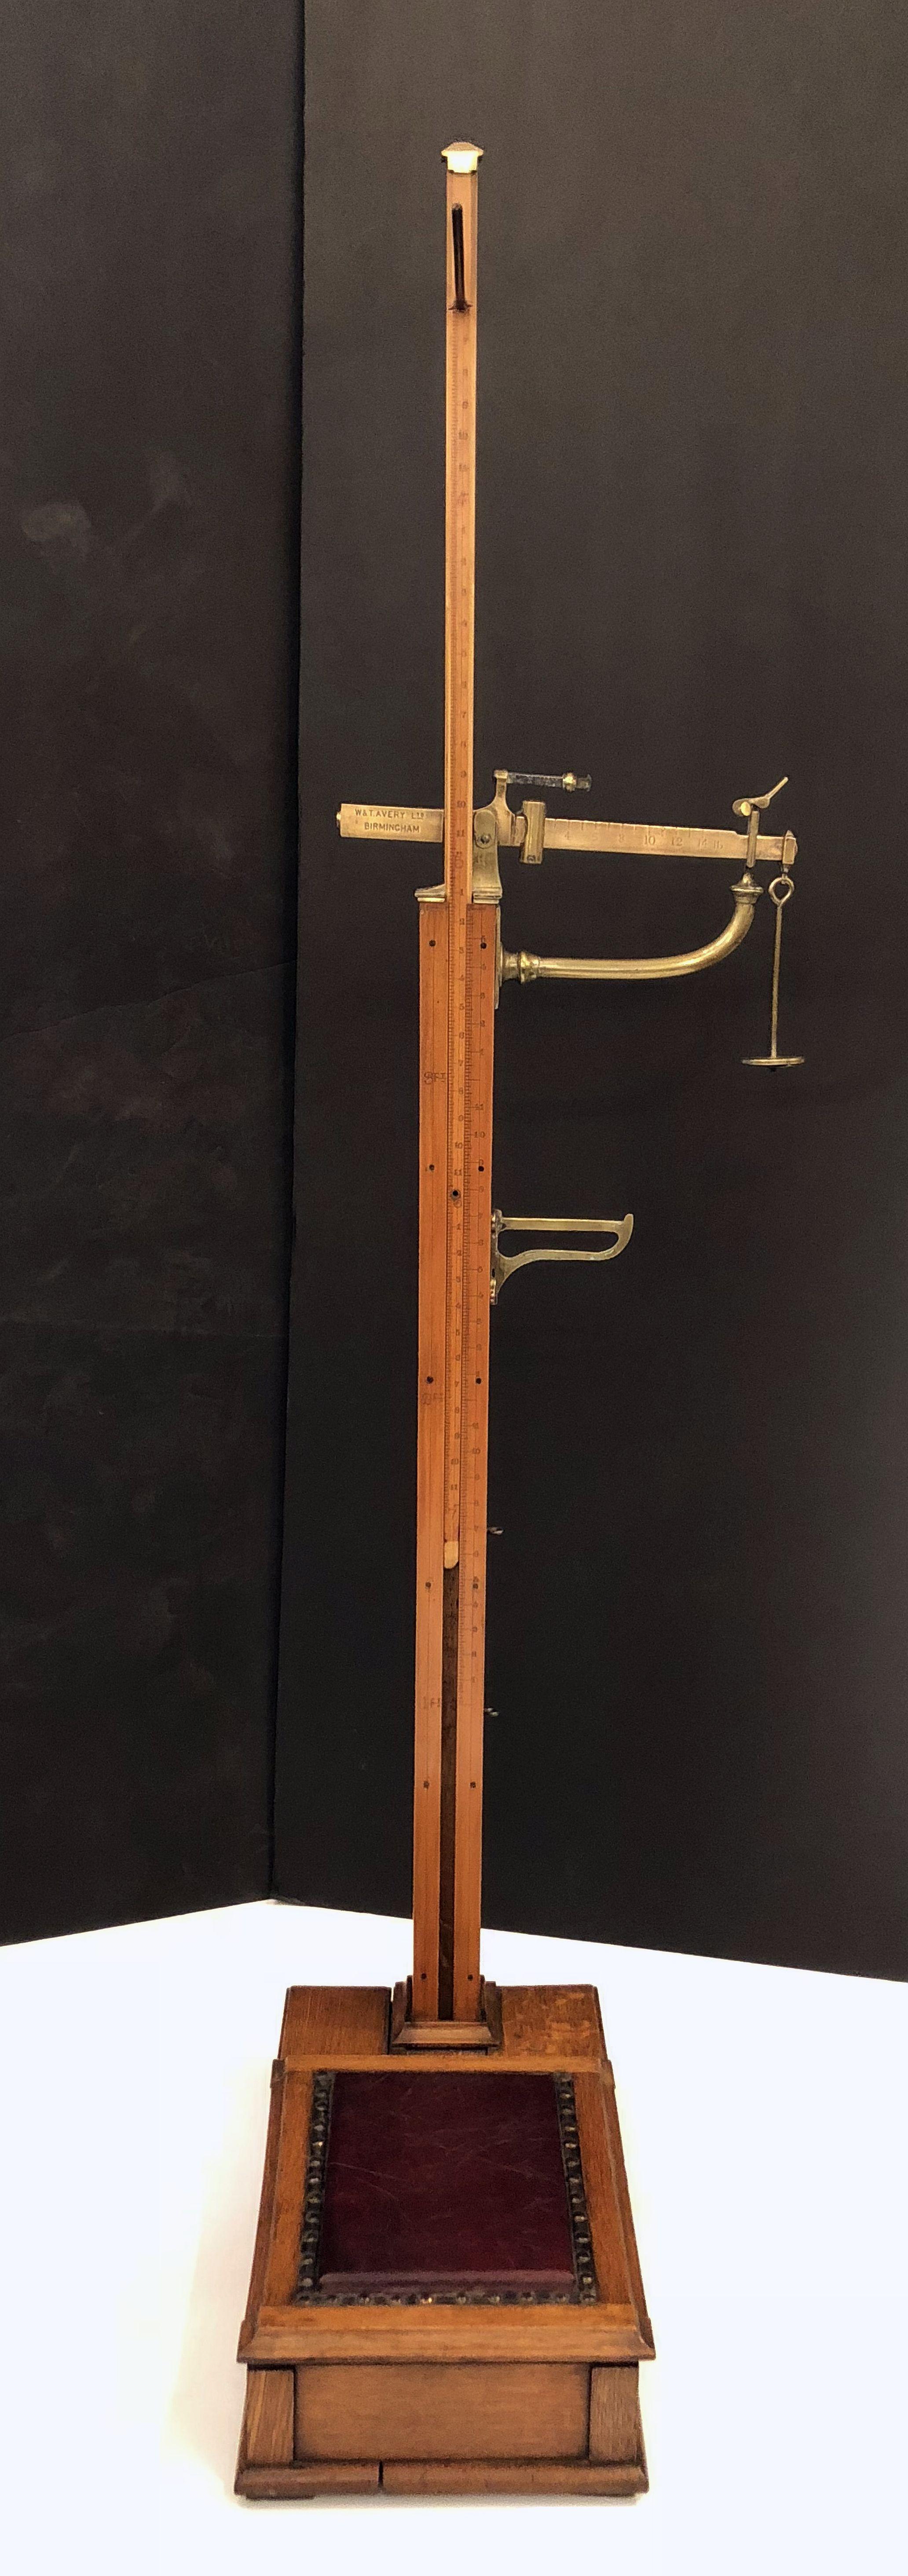 A large fine English athlete's or sportsman's personal standing floor scale, from the Edwardian era, featuring a platform of oak, boxwood, and brass.
With storage for brass weights and nail-head leather cushion footrest.

From the highly regarded